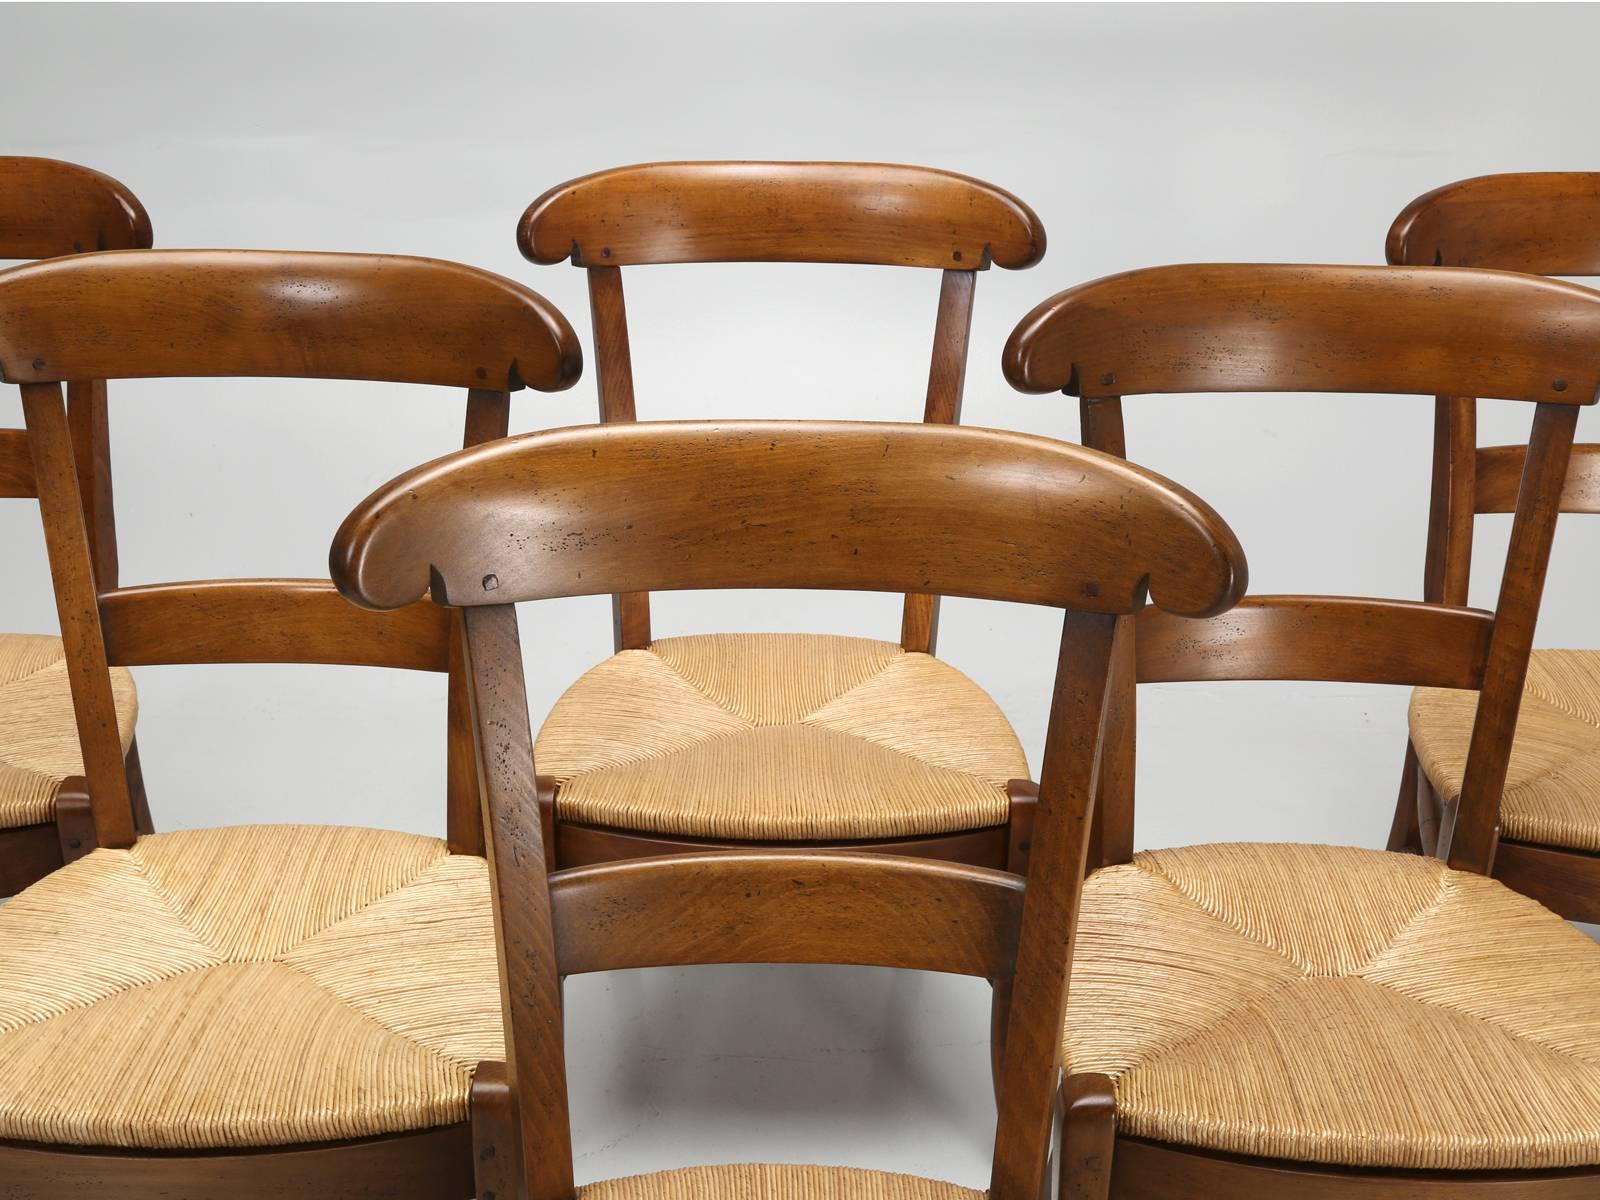 French set of (eight) handmade dining chairs, that are extremely comfortable. We special order these French Country dining chairs, from a supplier who has been making French dining chairs for over 160 years, in the same building. The chairs are,